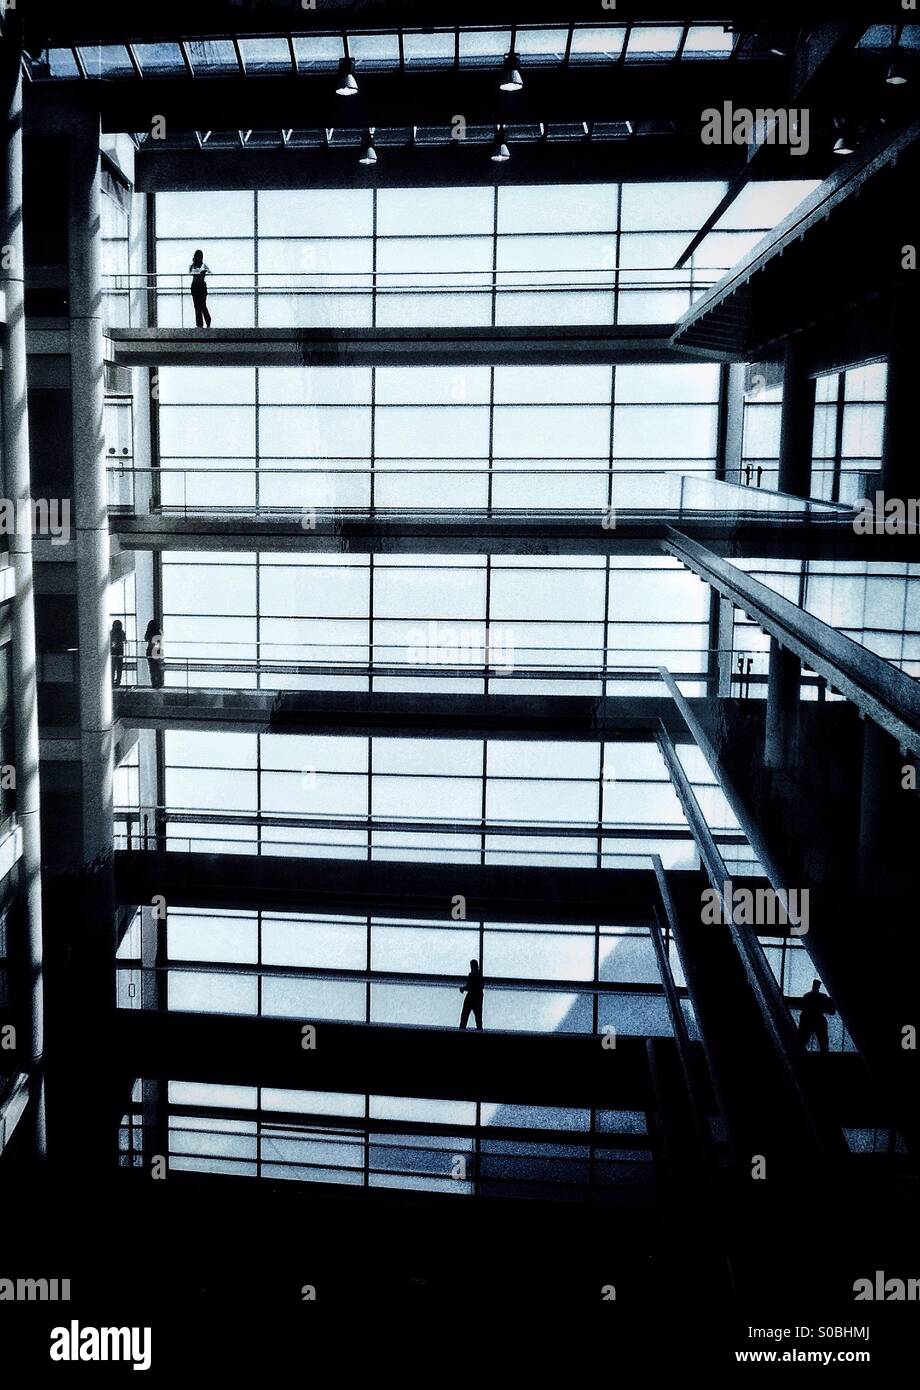 Figures in an office building Stock Photo